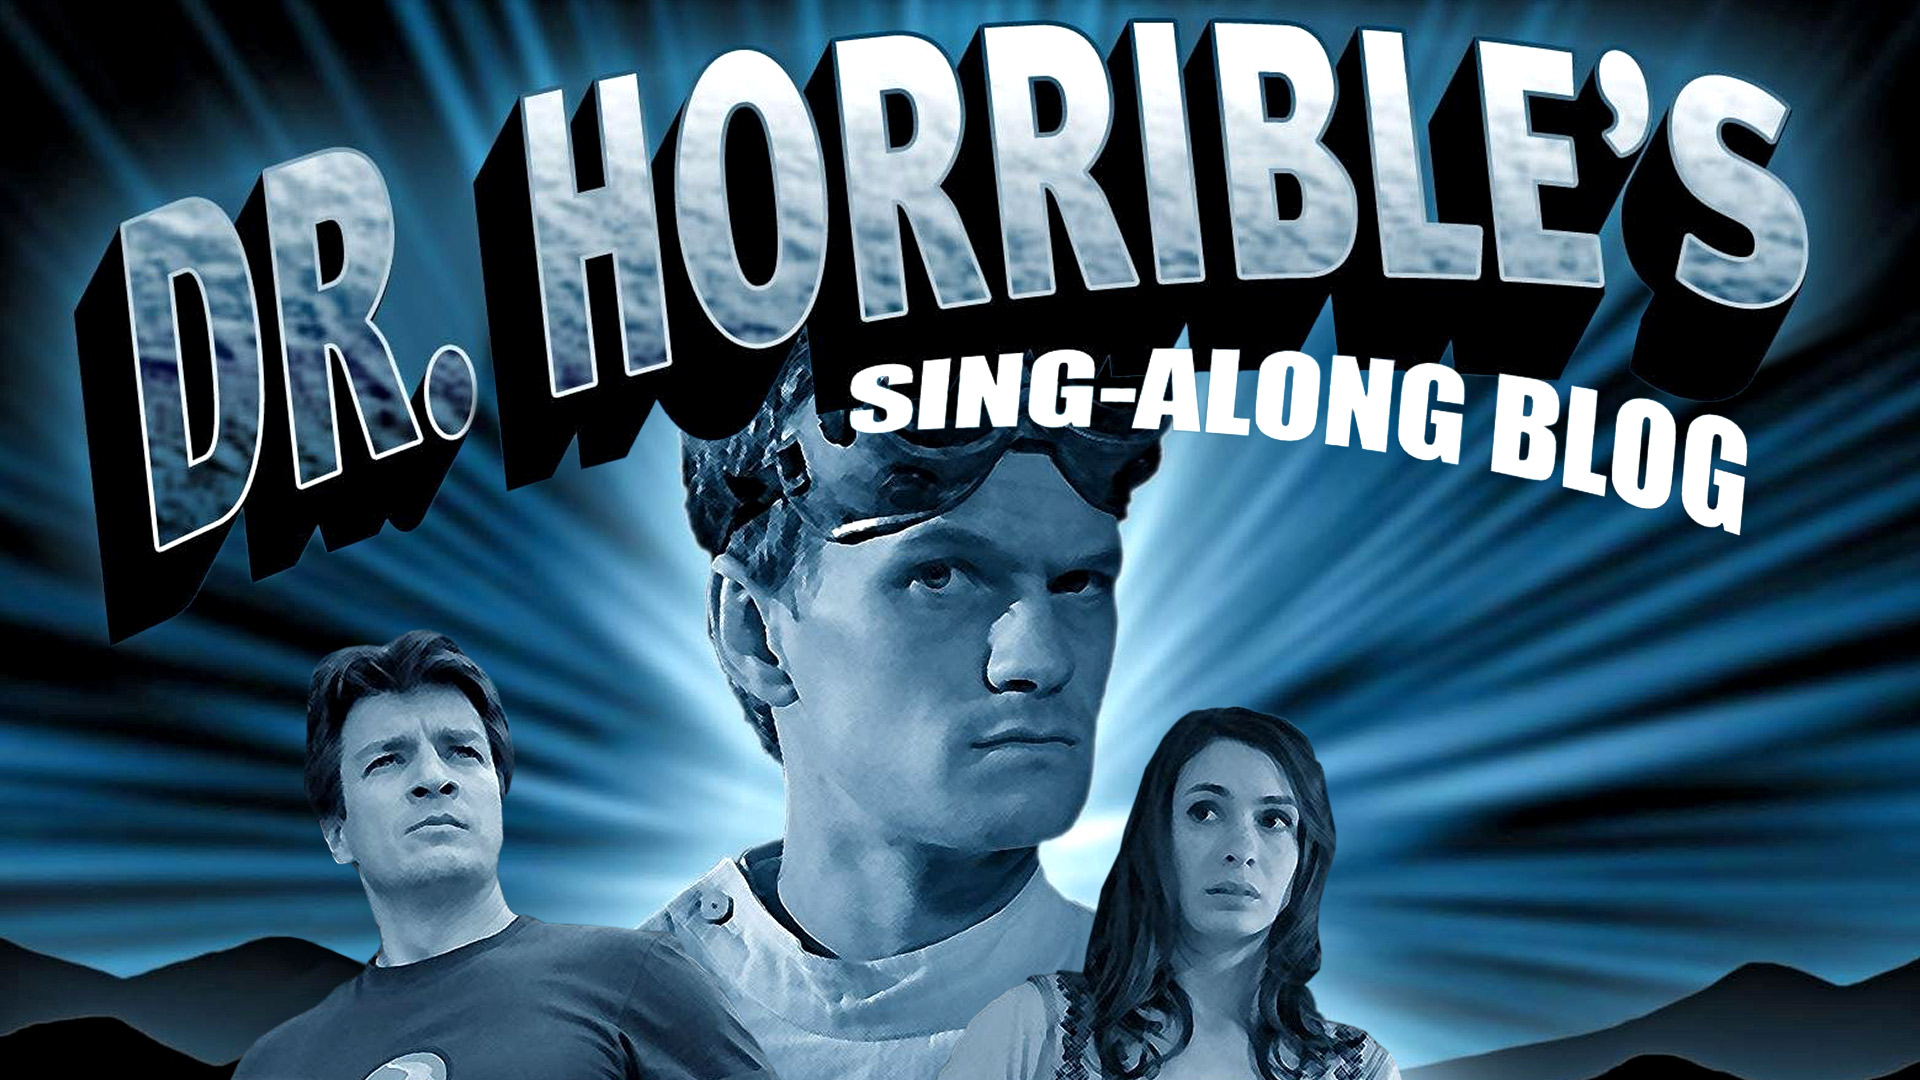 Doctor Horrible'S Sing-Along Blog Wallpapers